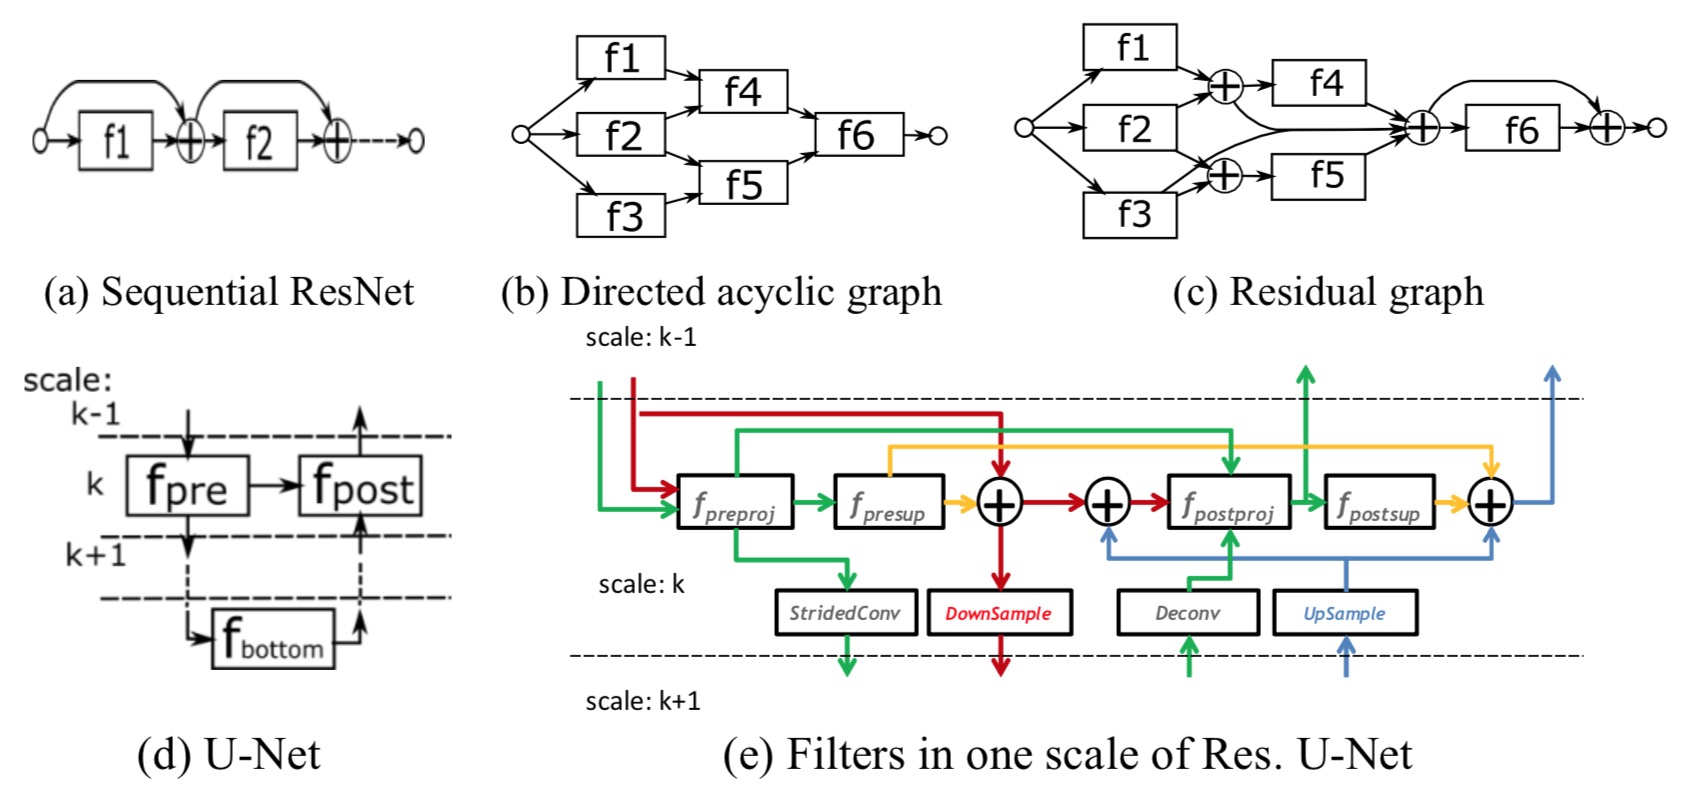 (a) An example of sequential residual network. (b) An example of directed acyclic graph. (c) The residual graph derived from (b). (d) The U-Net architecture. Downward arrows represent down-sampling or strided convolutions. Upward arrows represent up-sampling or deconvolution. (e) The Res. U-Net architecture. It consists of two threads. The first thread is scale-specific features: the green channels. It follows a similar architecture to the U-Net. The second thread is the residual architecture, including the red, the orange and the blue channels.